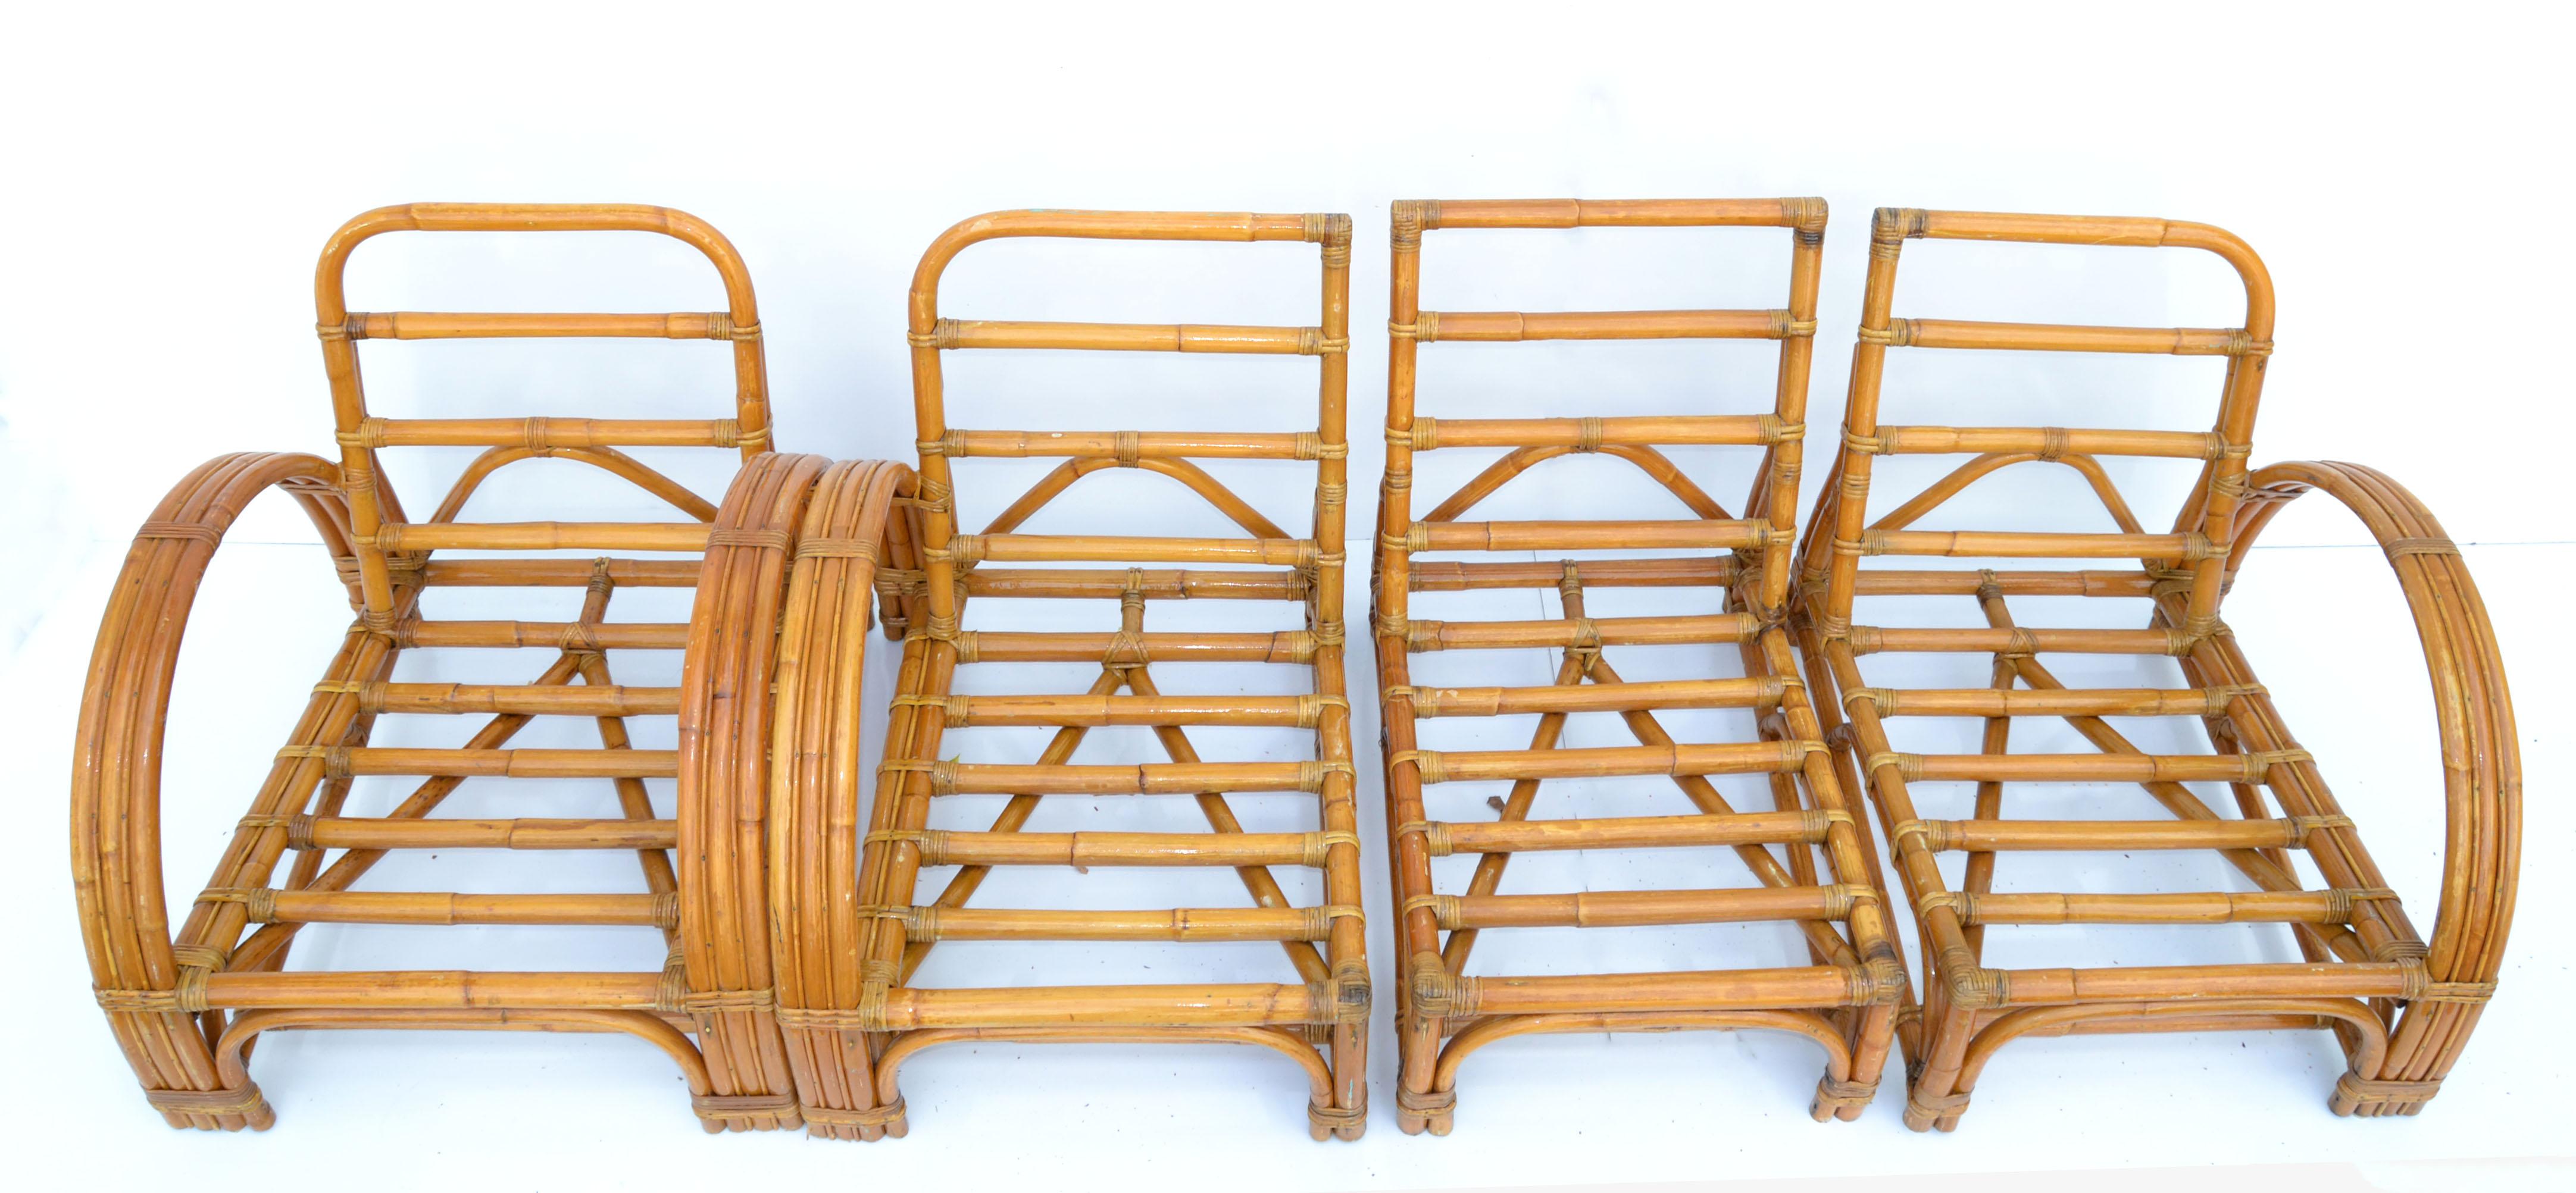 Chinese Export Calif Asia 4 Piece Seating Set Bamboo Sofa & Lounge Chair Turquoise Upholstery